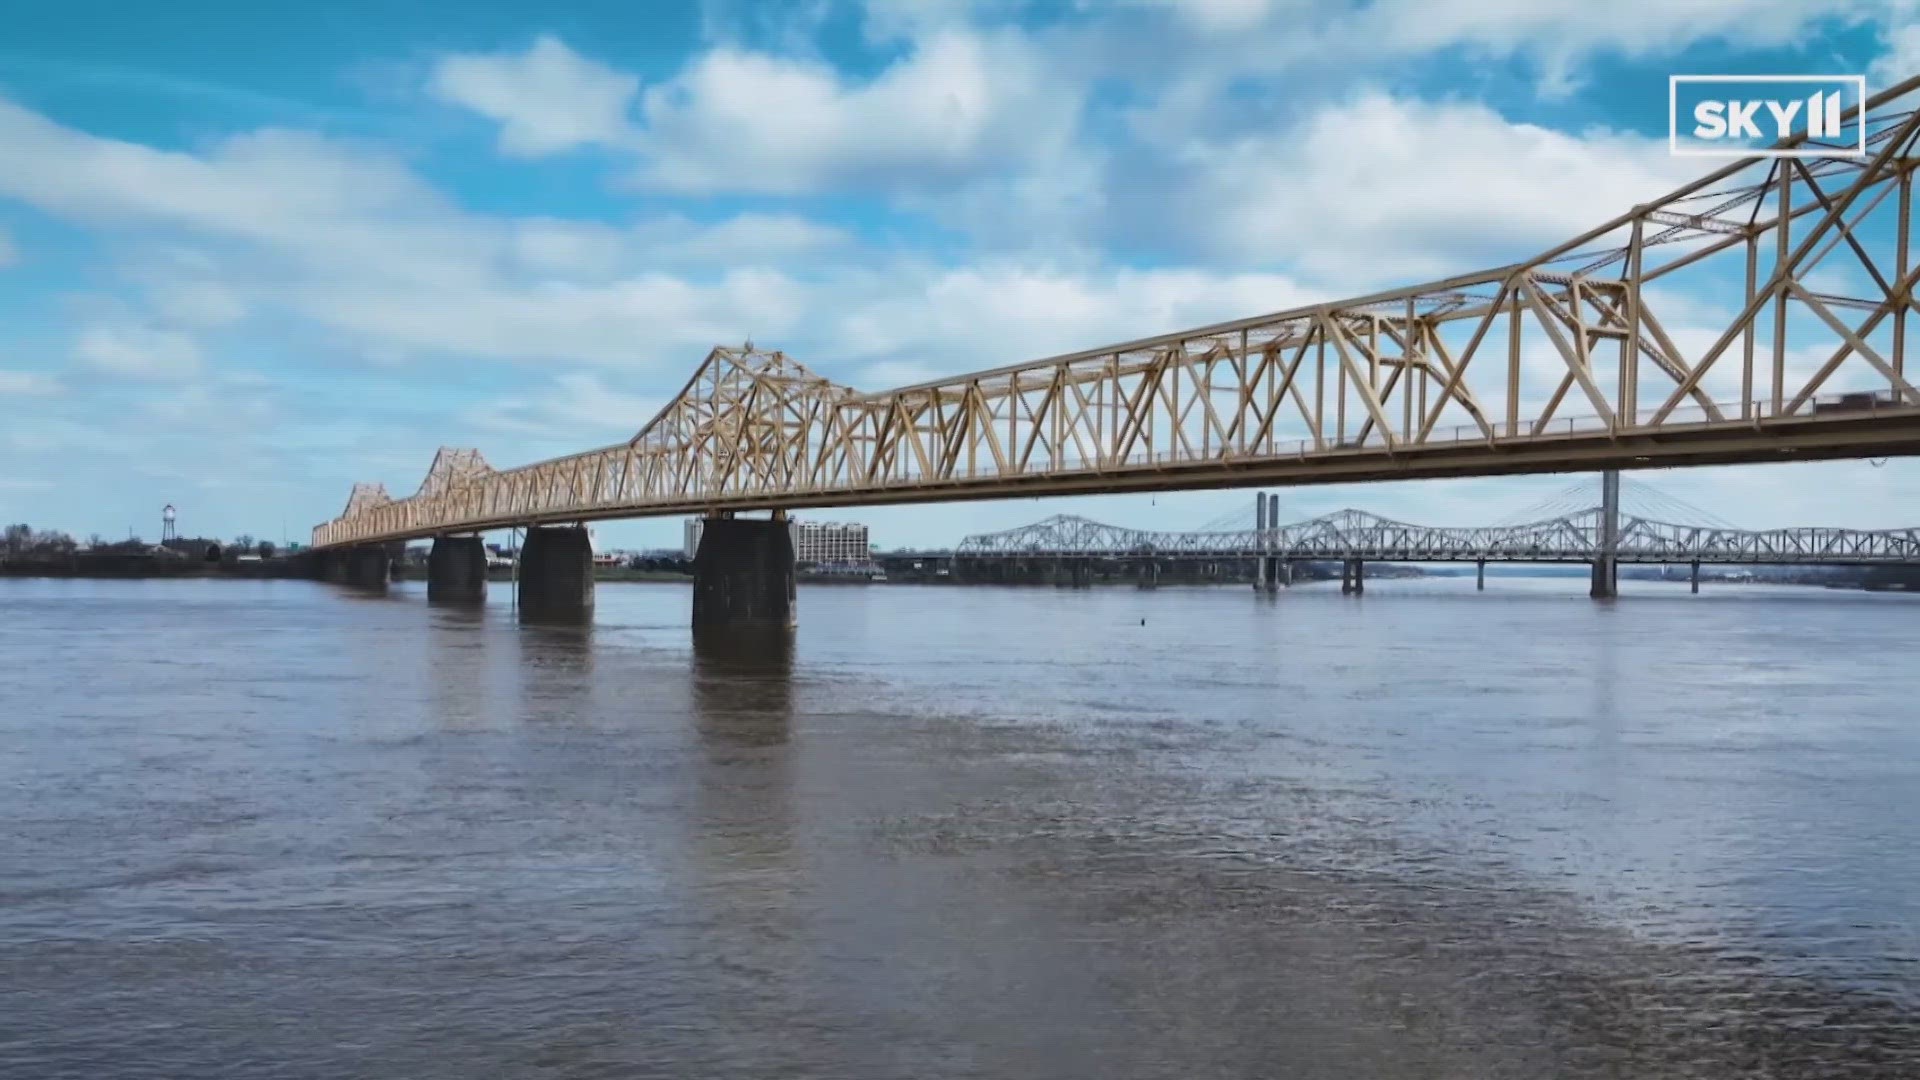 Only one lane will be open on the Second Street bridge Thursday as crews continue repairs.